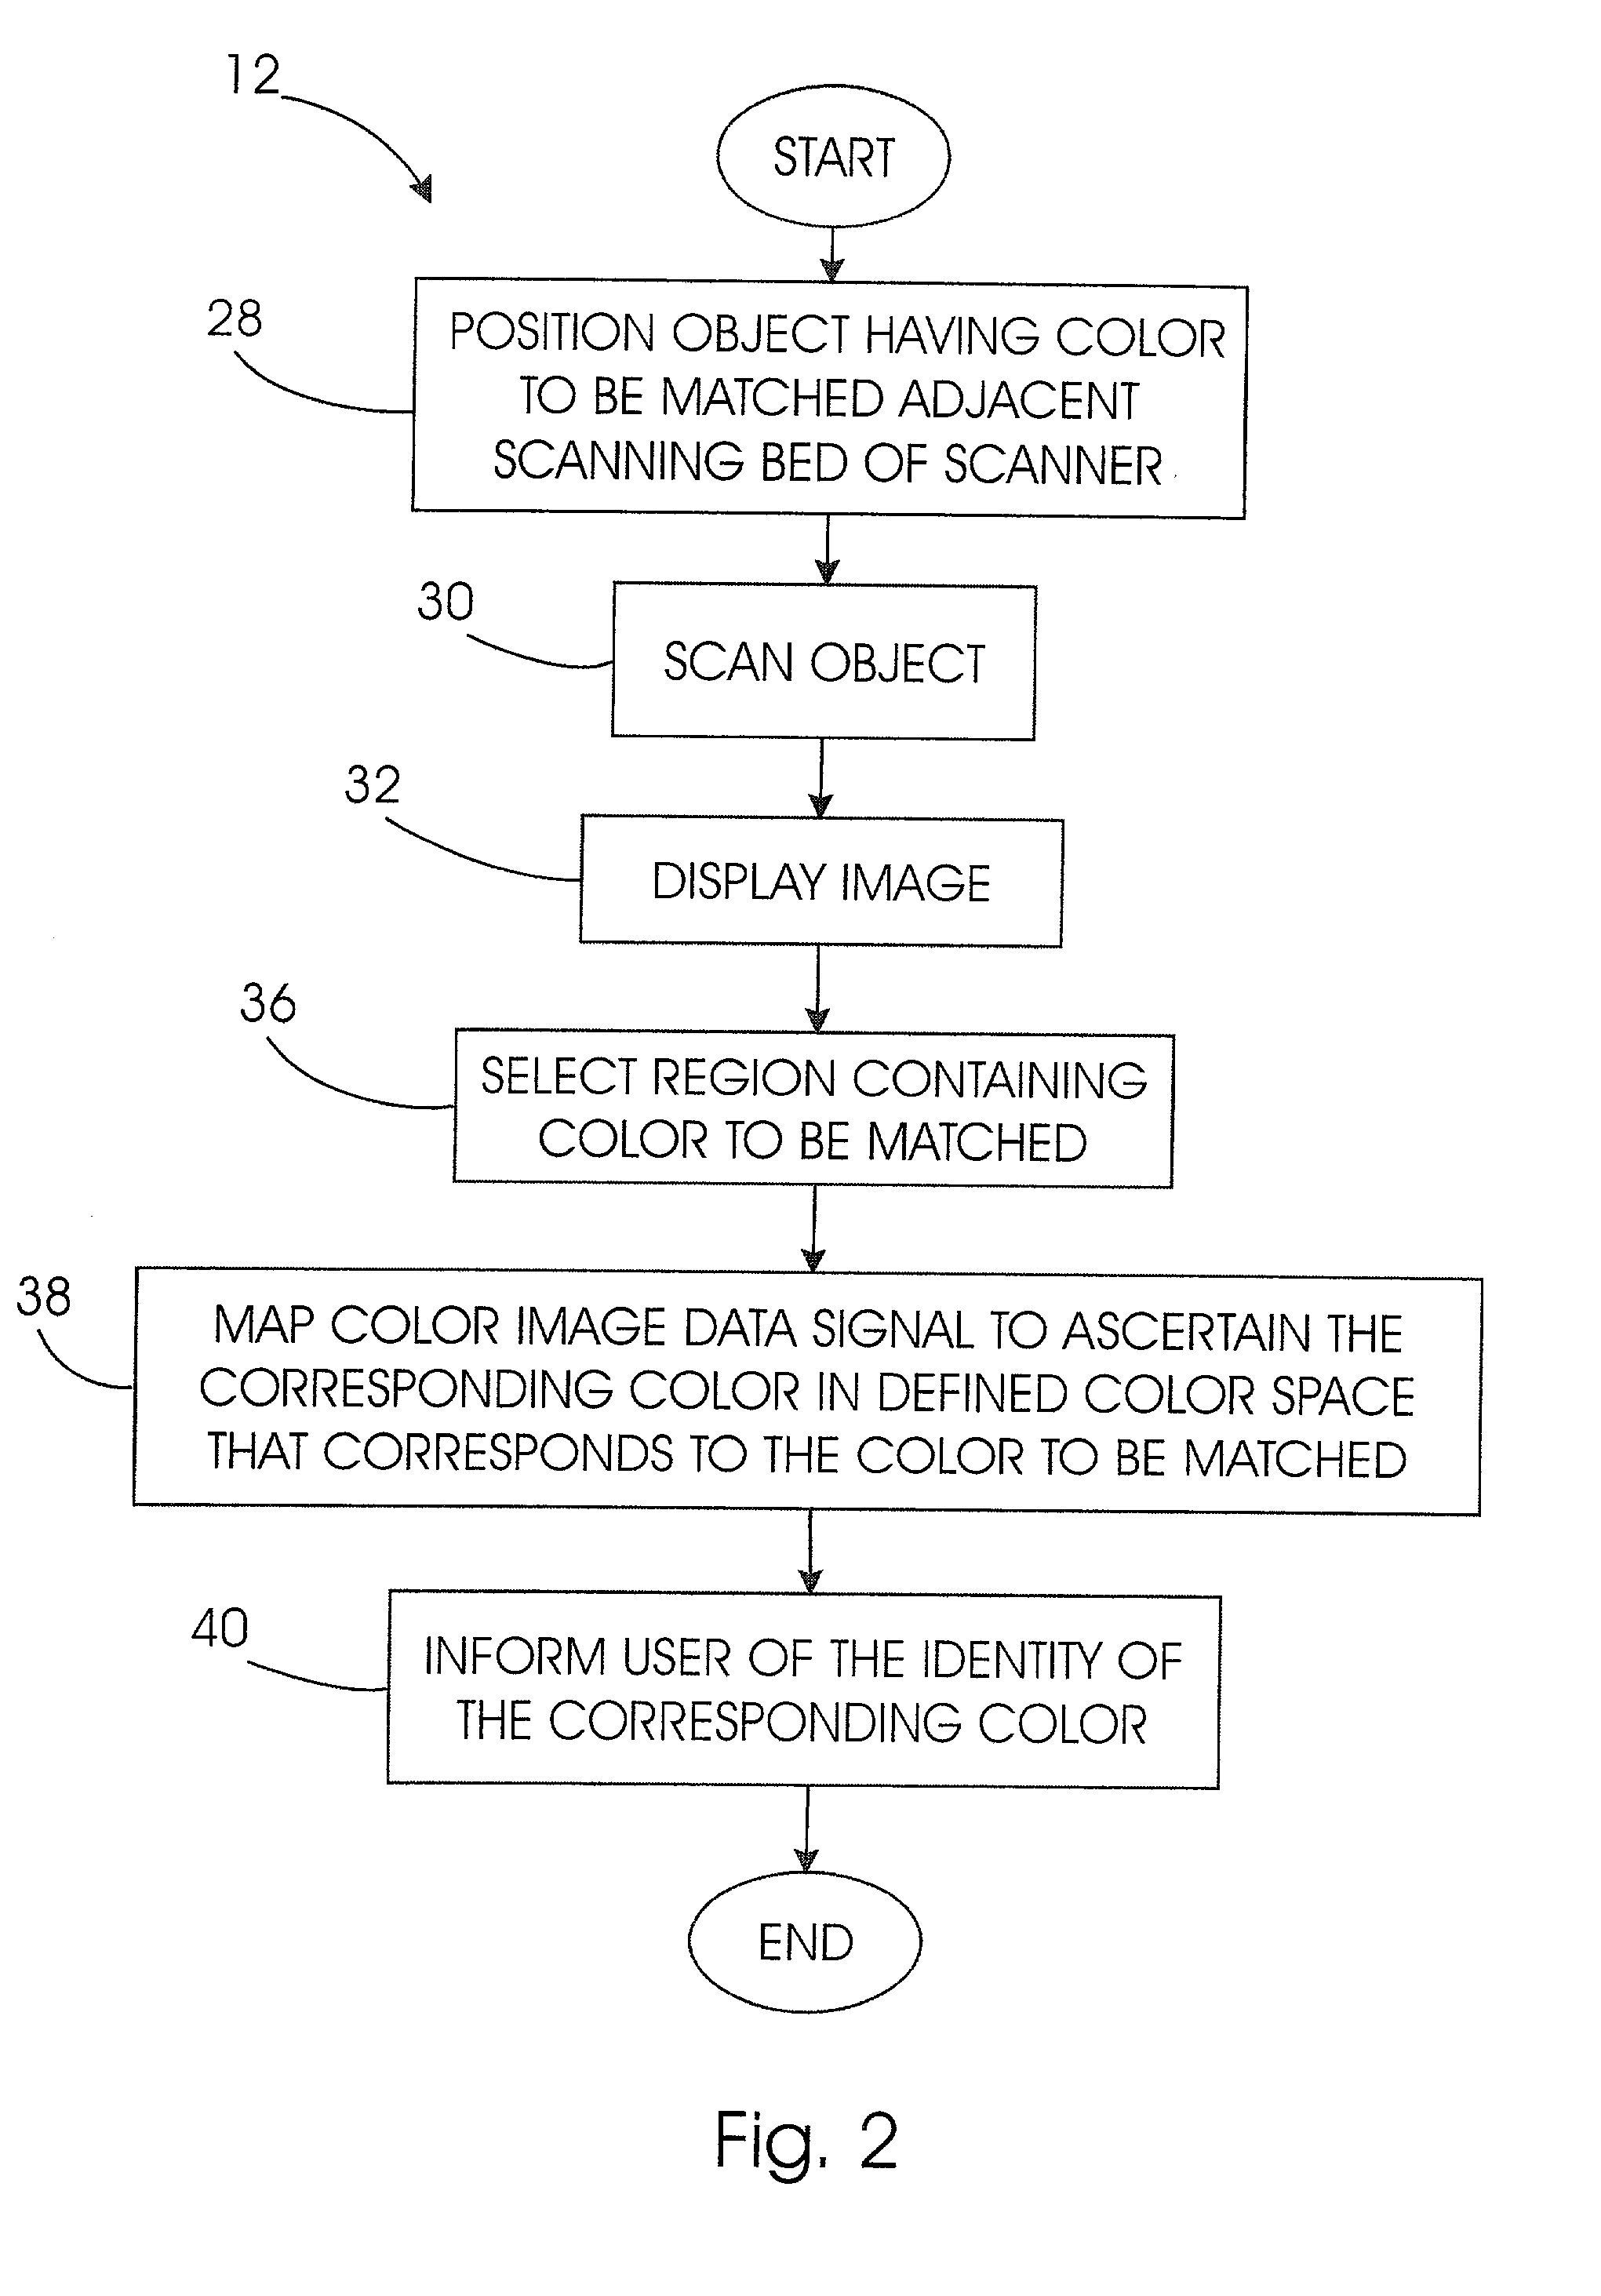 Method and apparatus for matching color image data with a corresponding color in a defined color space